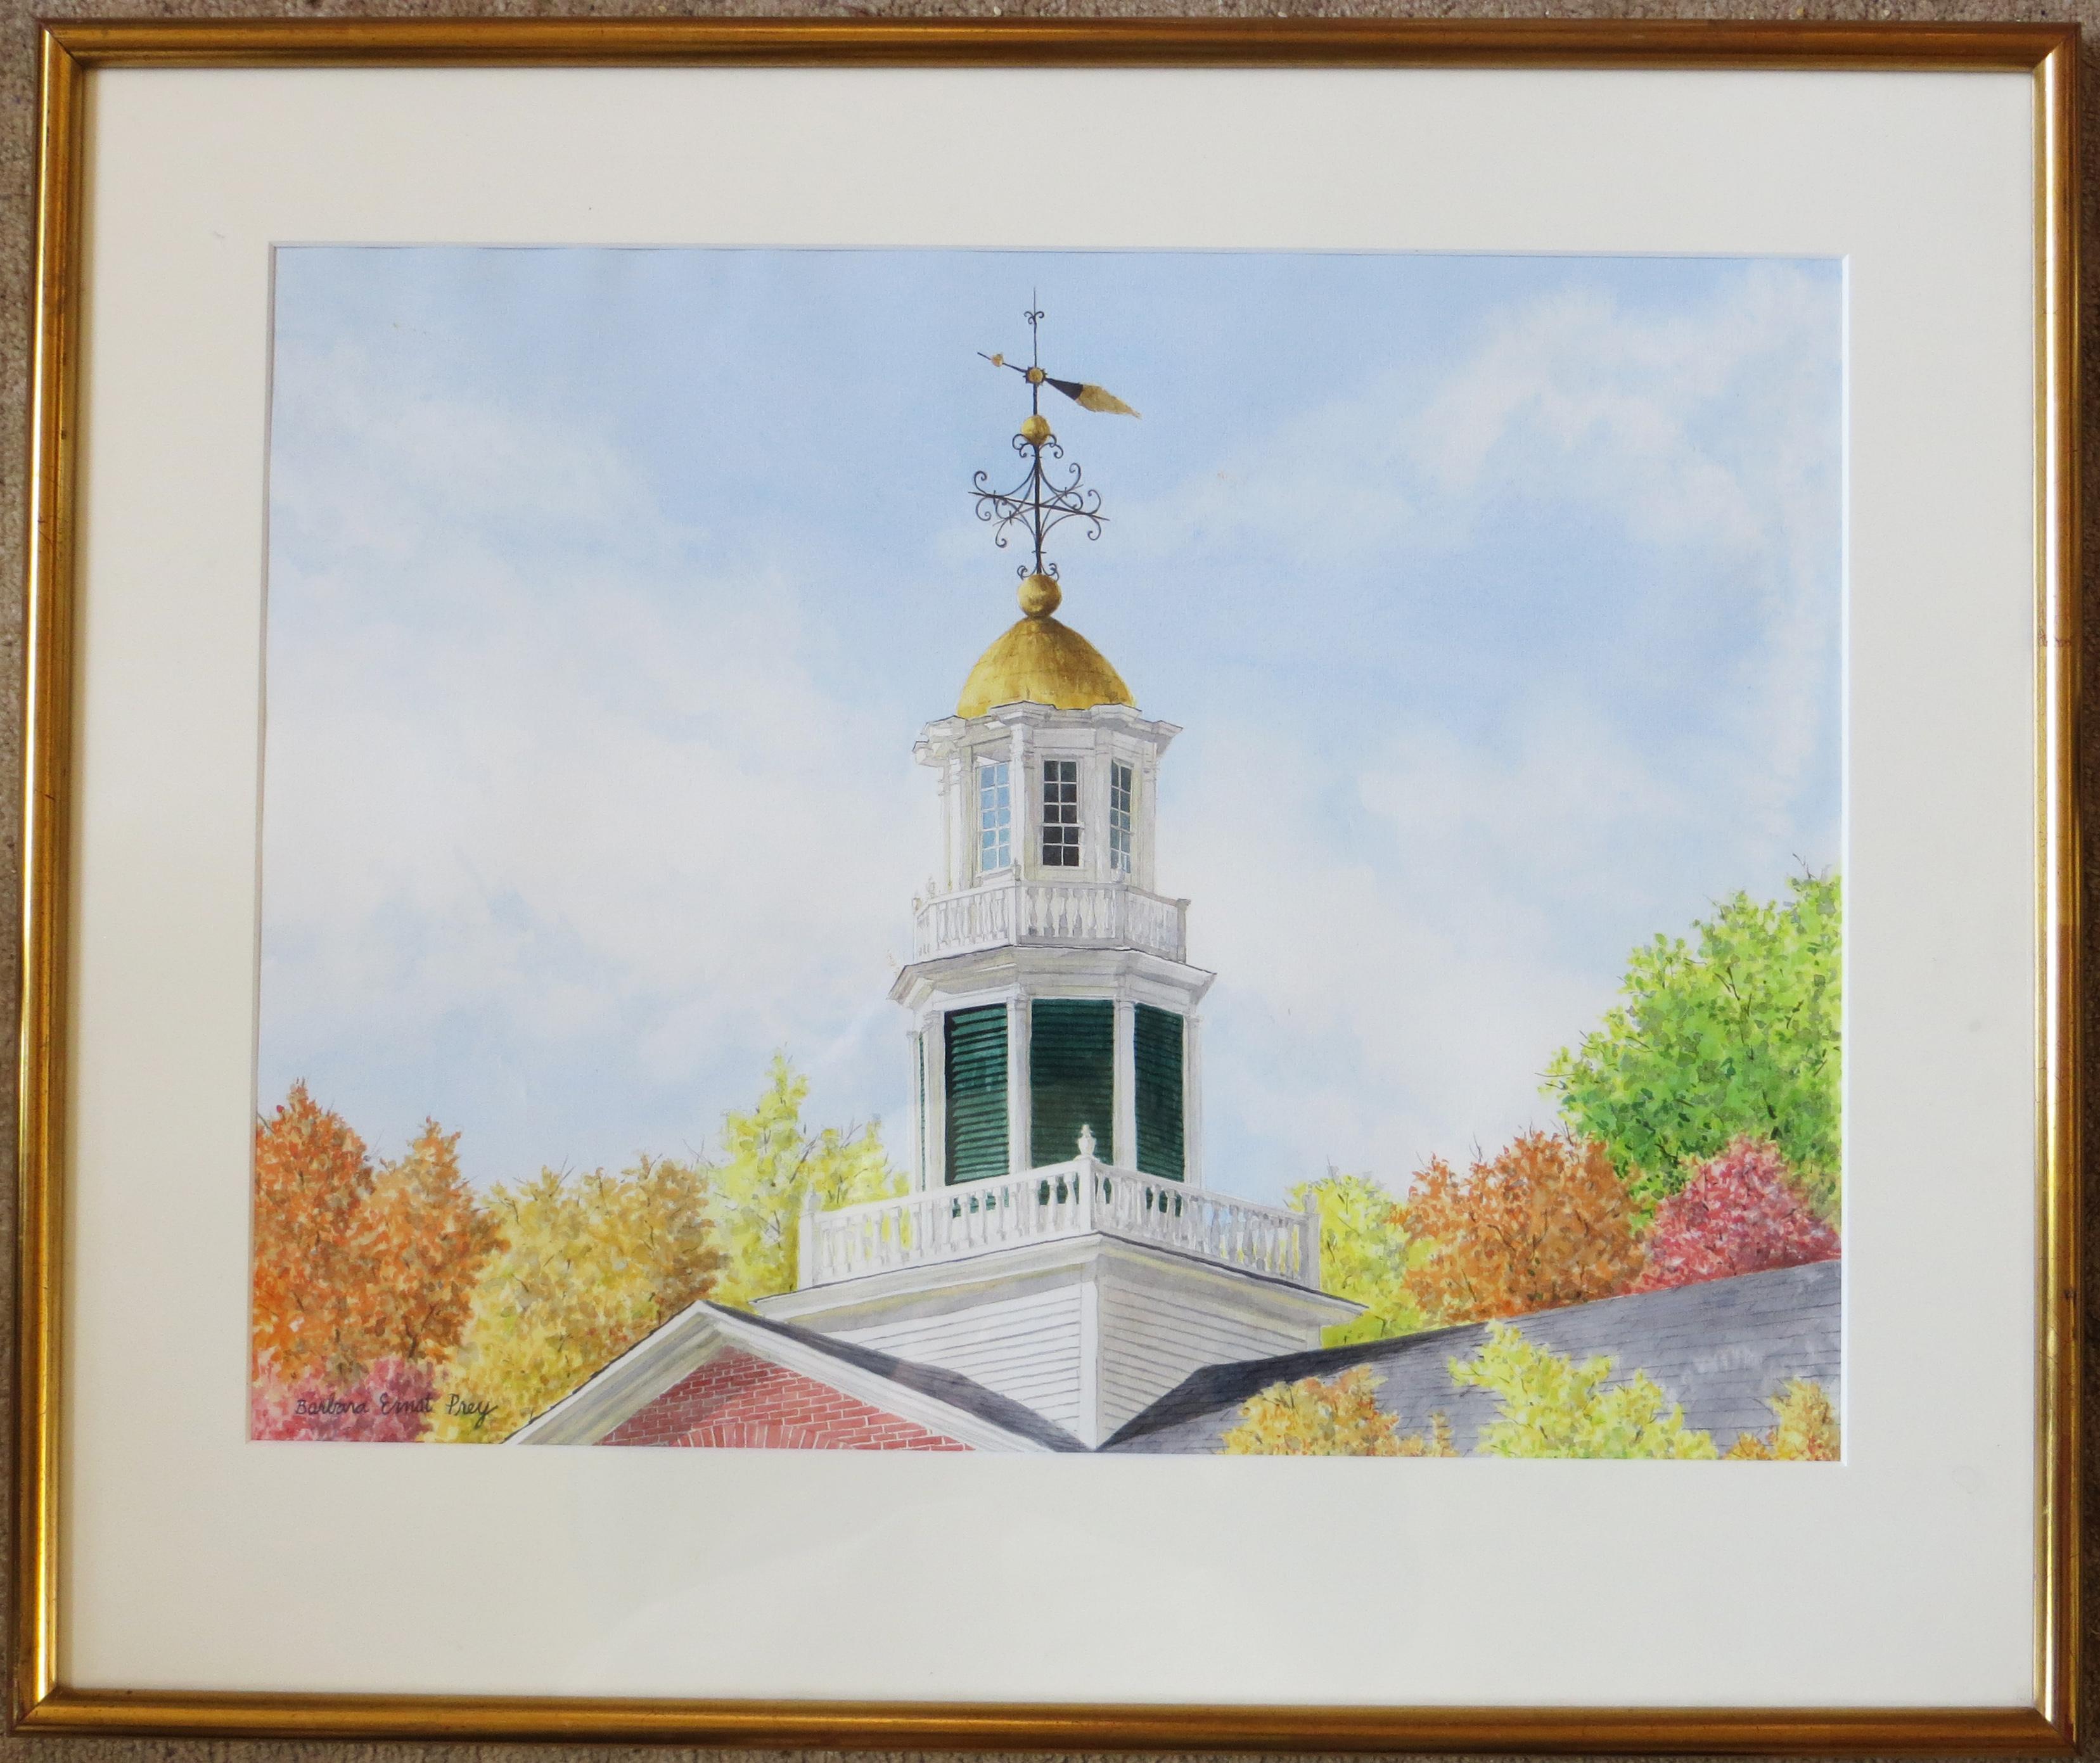 Artist: Barbara Ernst Prey – American (1957-)
Title: Griffin Hall, Williams College, Autumn
Year: circa 1980-1985
Medium: watercolor
Sight size: 14.5 x 19.5 inches. 
Framed size: 21 x 25 inches 
Signature: Signed lower left
Condition: Very good